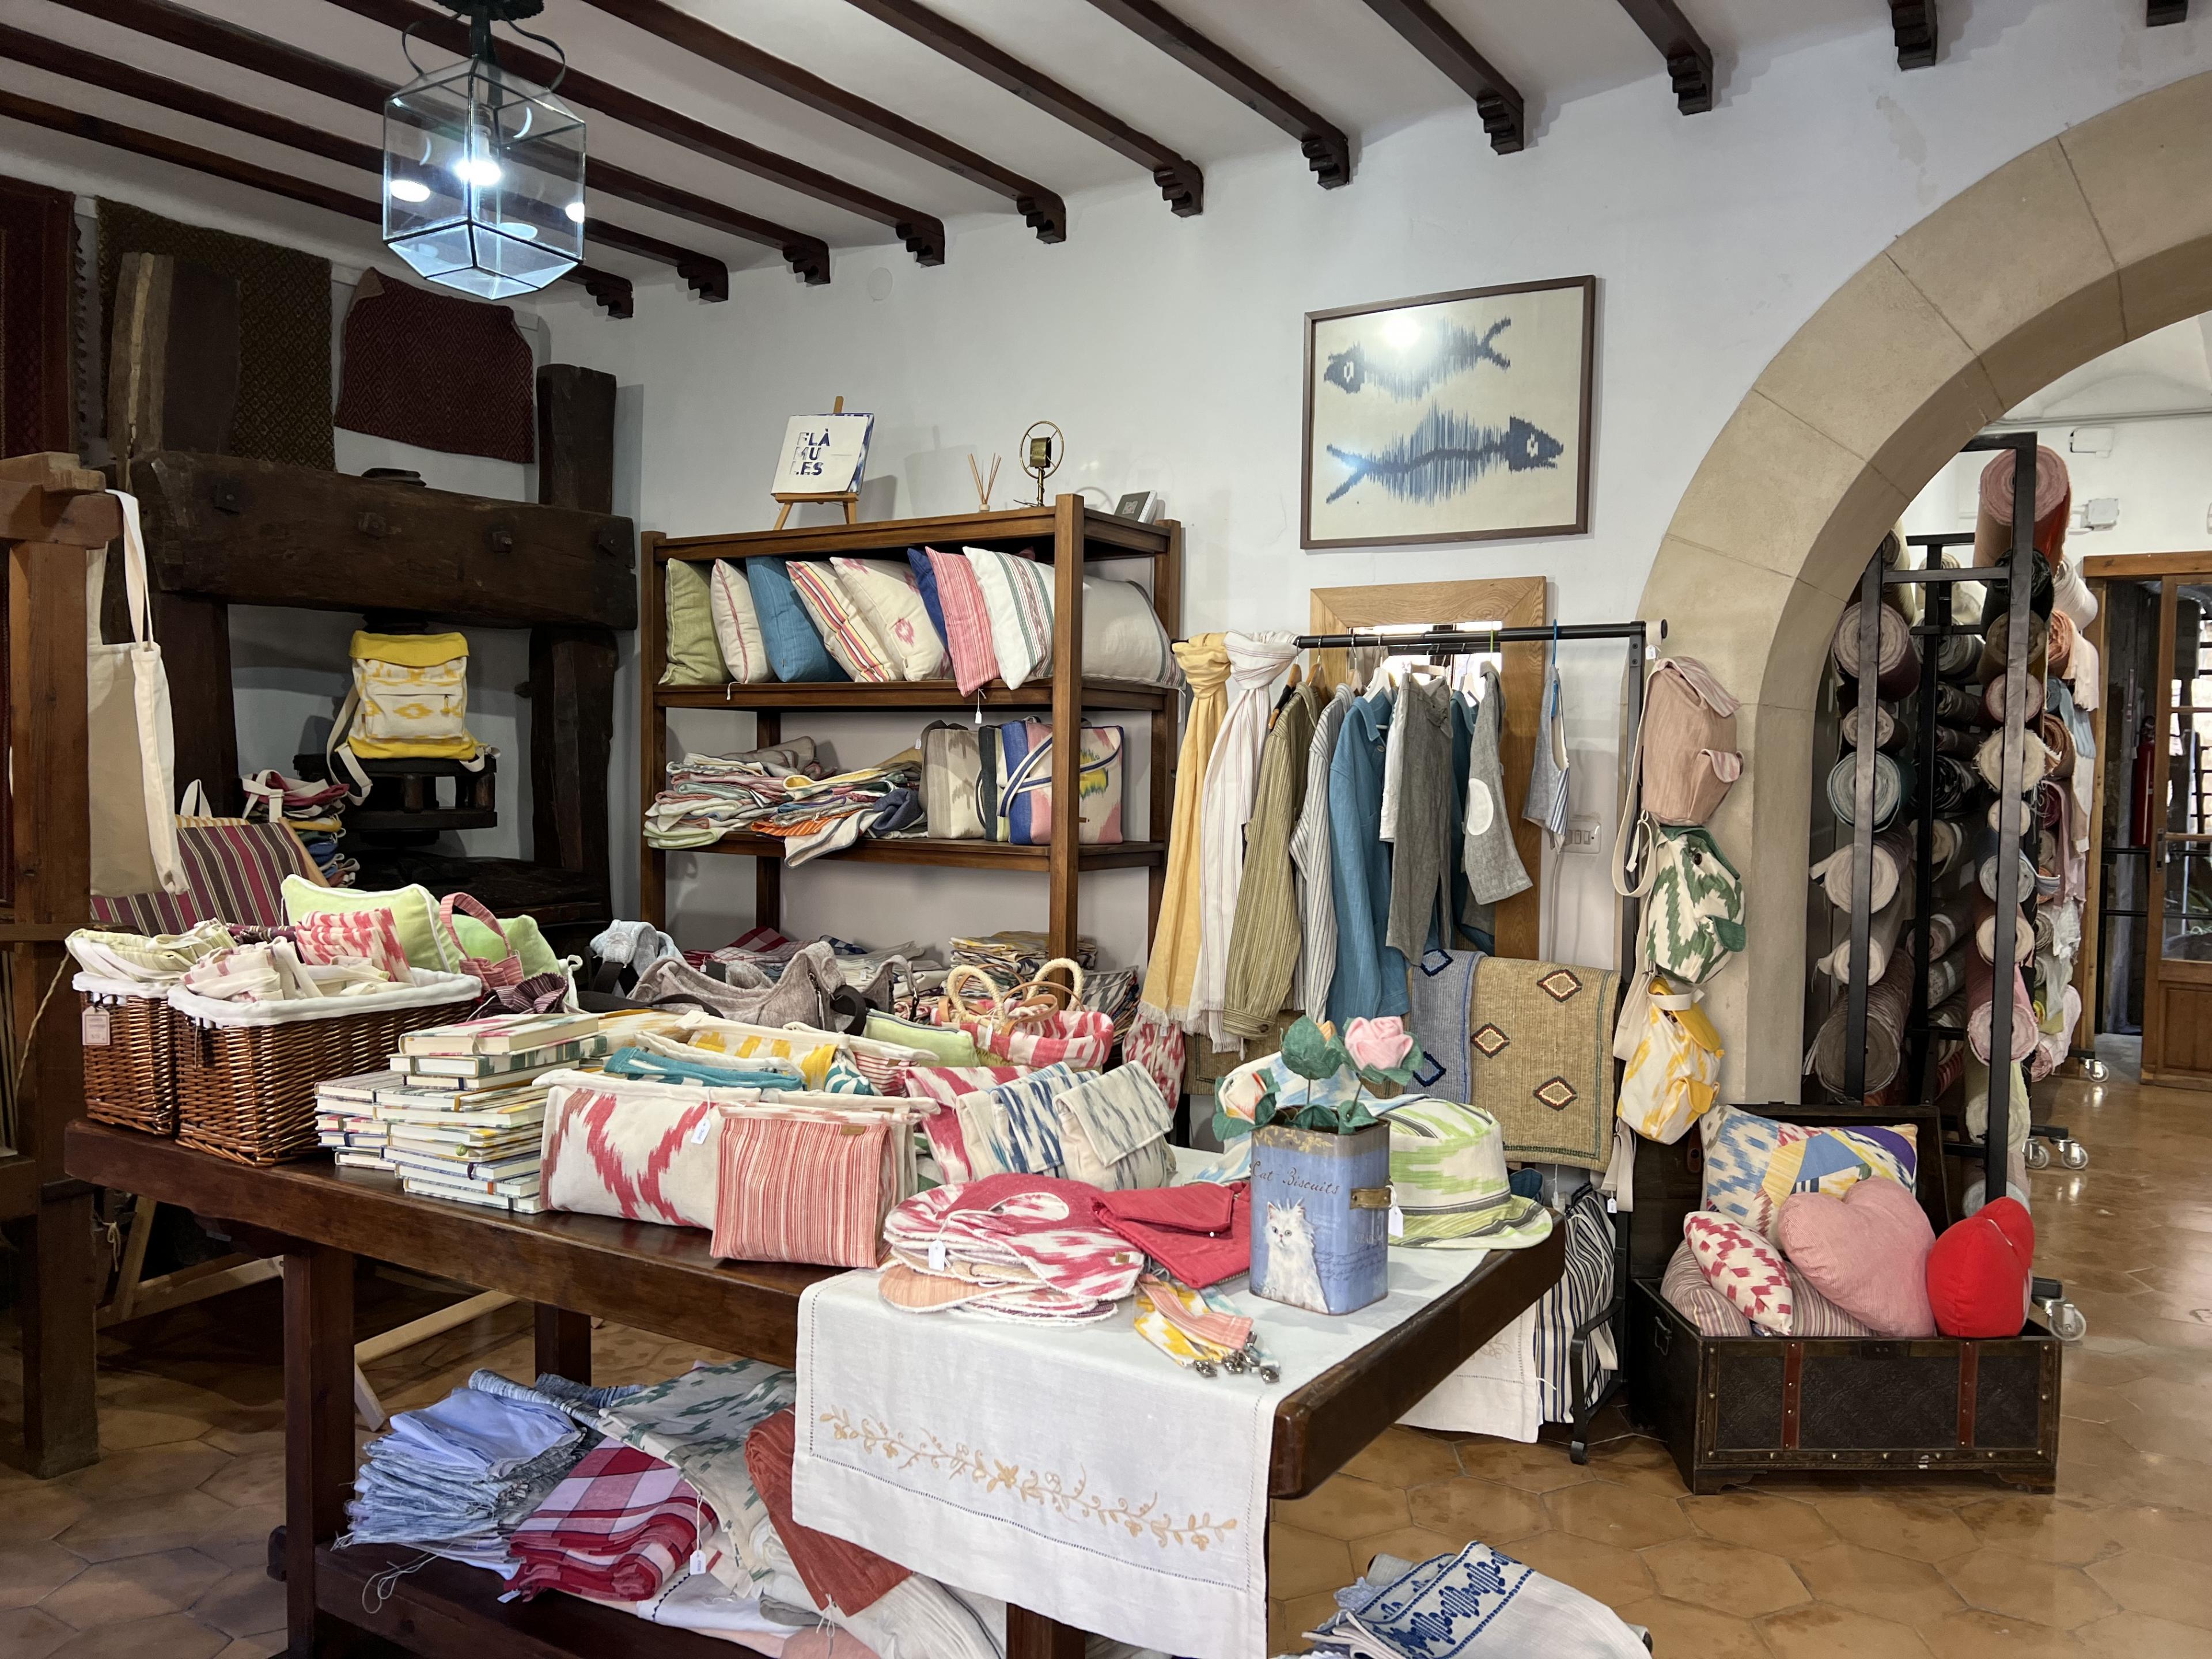 Textile shop full of pillows, scarves, blankets, and clothing 